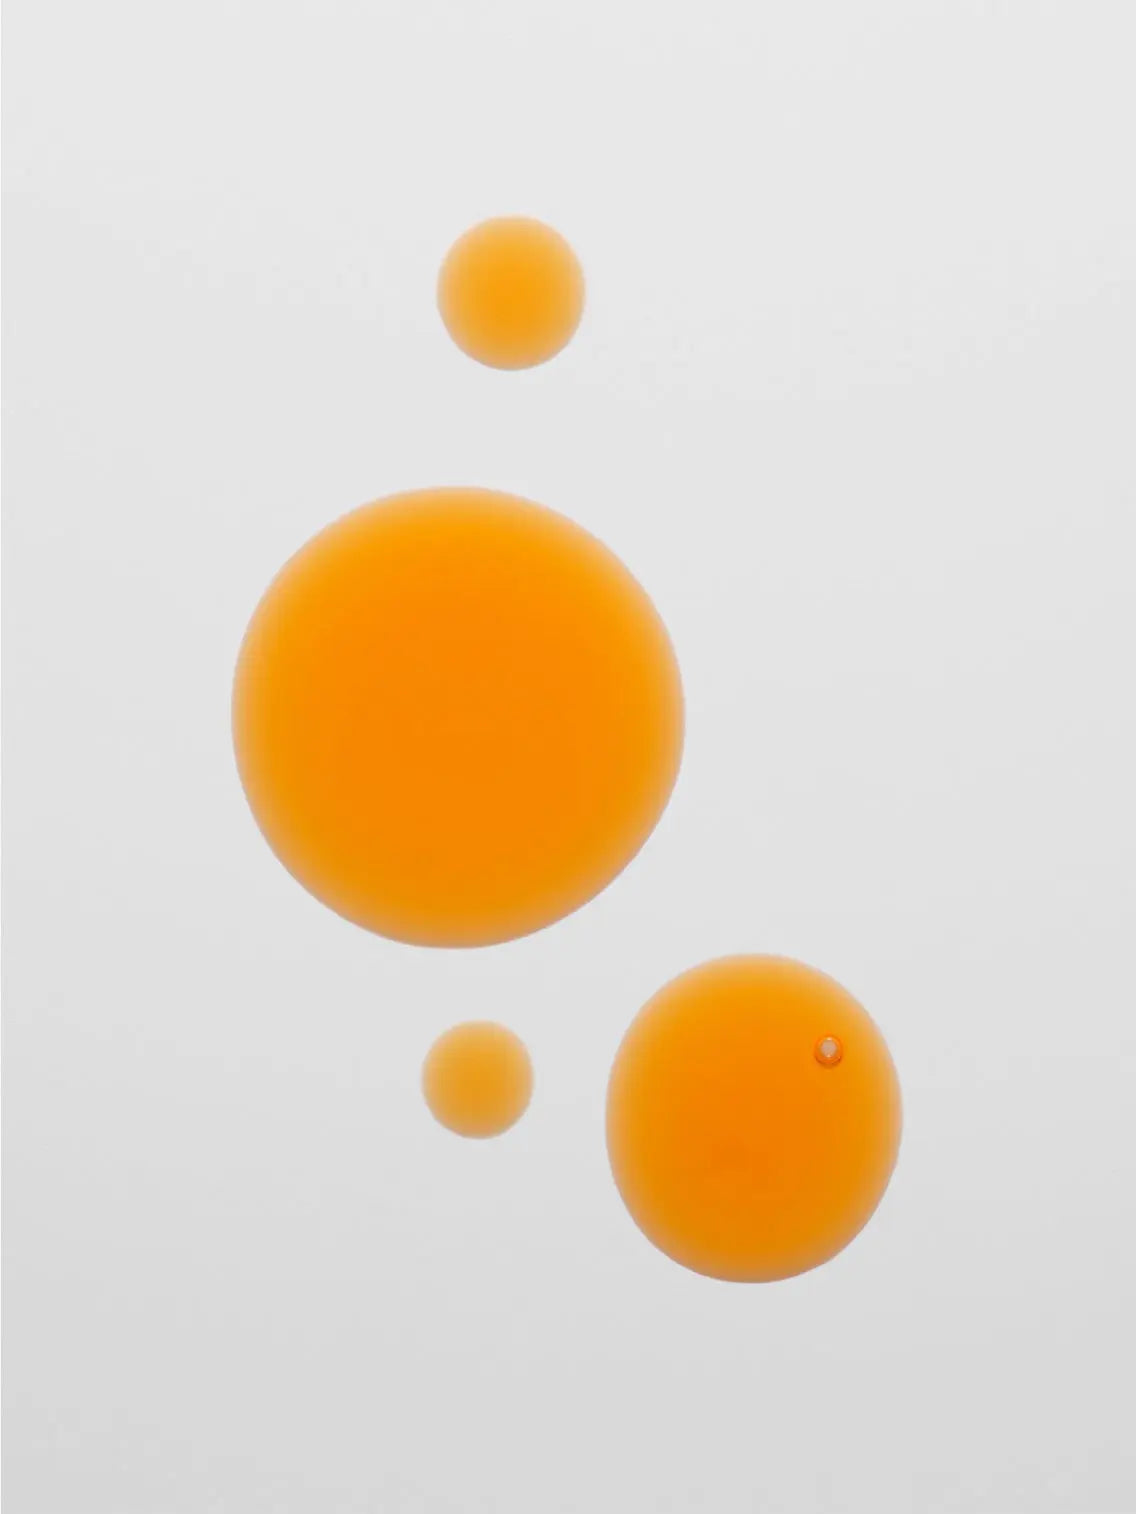 Four orange bubbles of varying sizes with smooth edges are suspended against a neutral white background. The bubbles, reminiscent of the dynamic energy found in a bustling Barcelona store, are arranged in a staggered formation, with the largest bubble near the center and two smaller bubbles directly above and below it. These vibrant orbs perfectly encapsulate the essence of Jorgobé's Bakuchiol Face Oil 30ml.